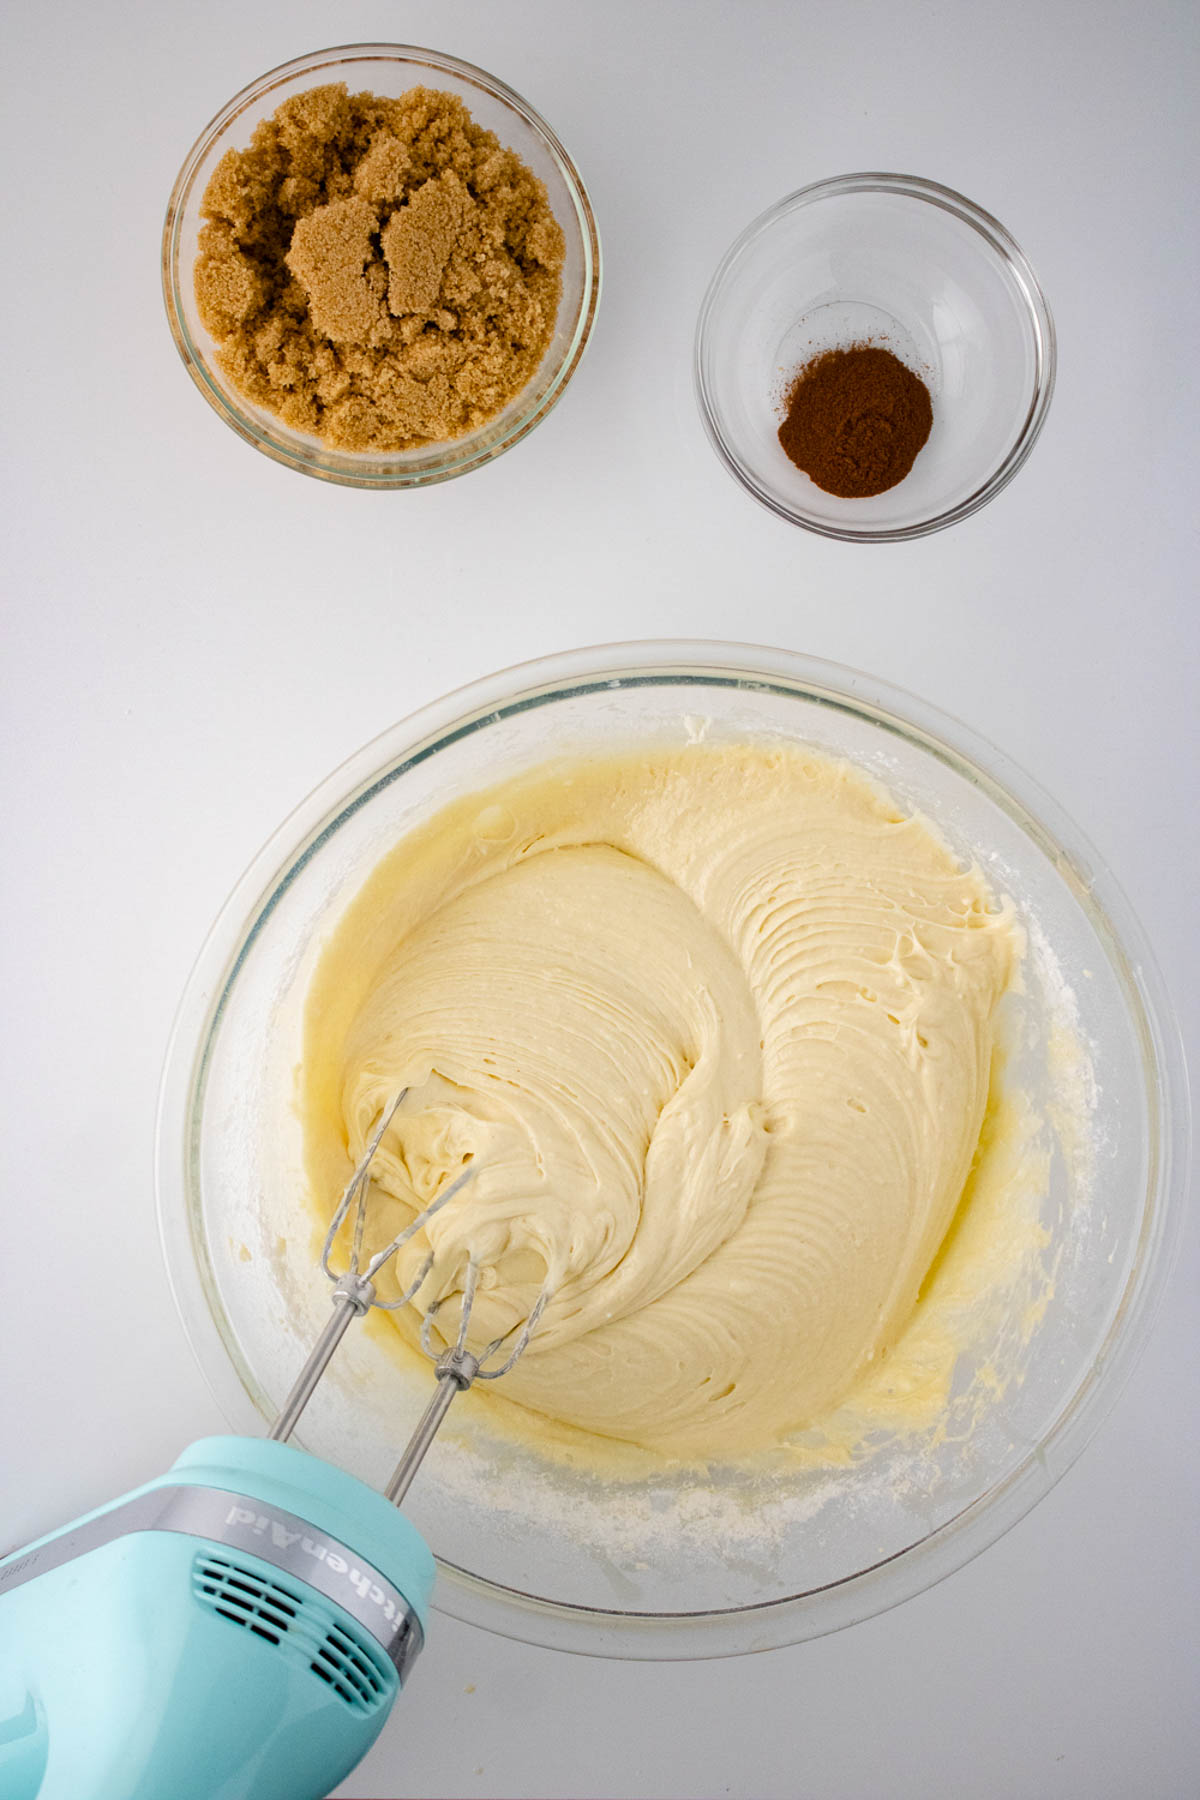 Top view of a bowl containing creamed batter for honey bun cake with a hand mixer, flanked by bowls of brown sugar and cocoa powder on a white surface.